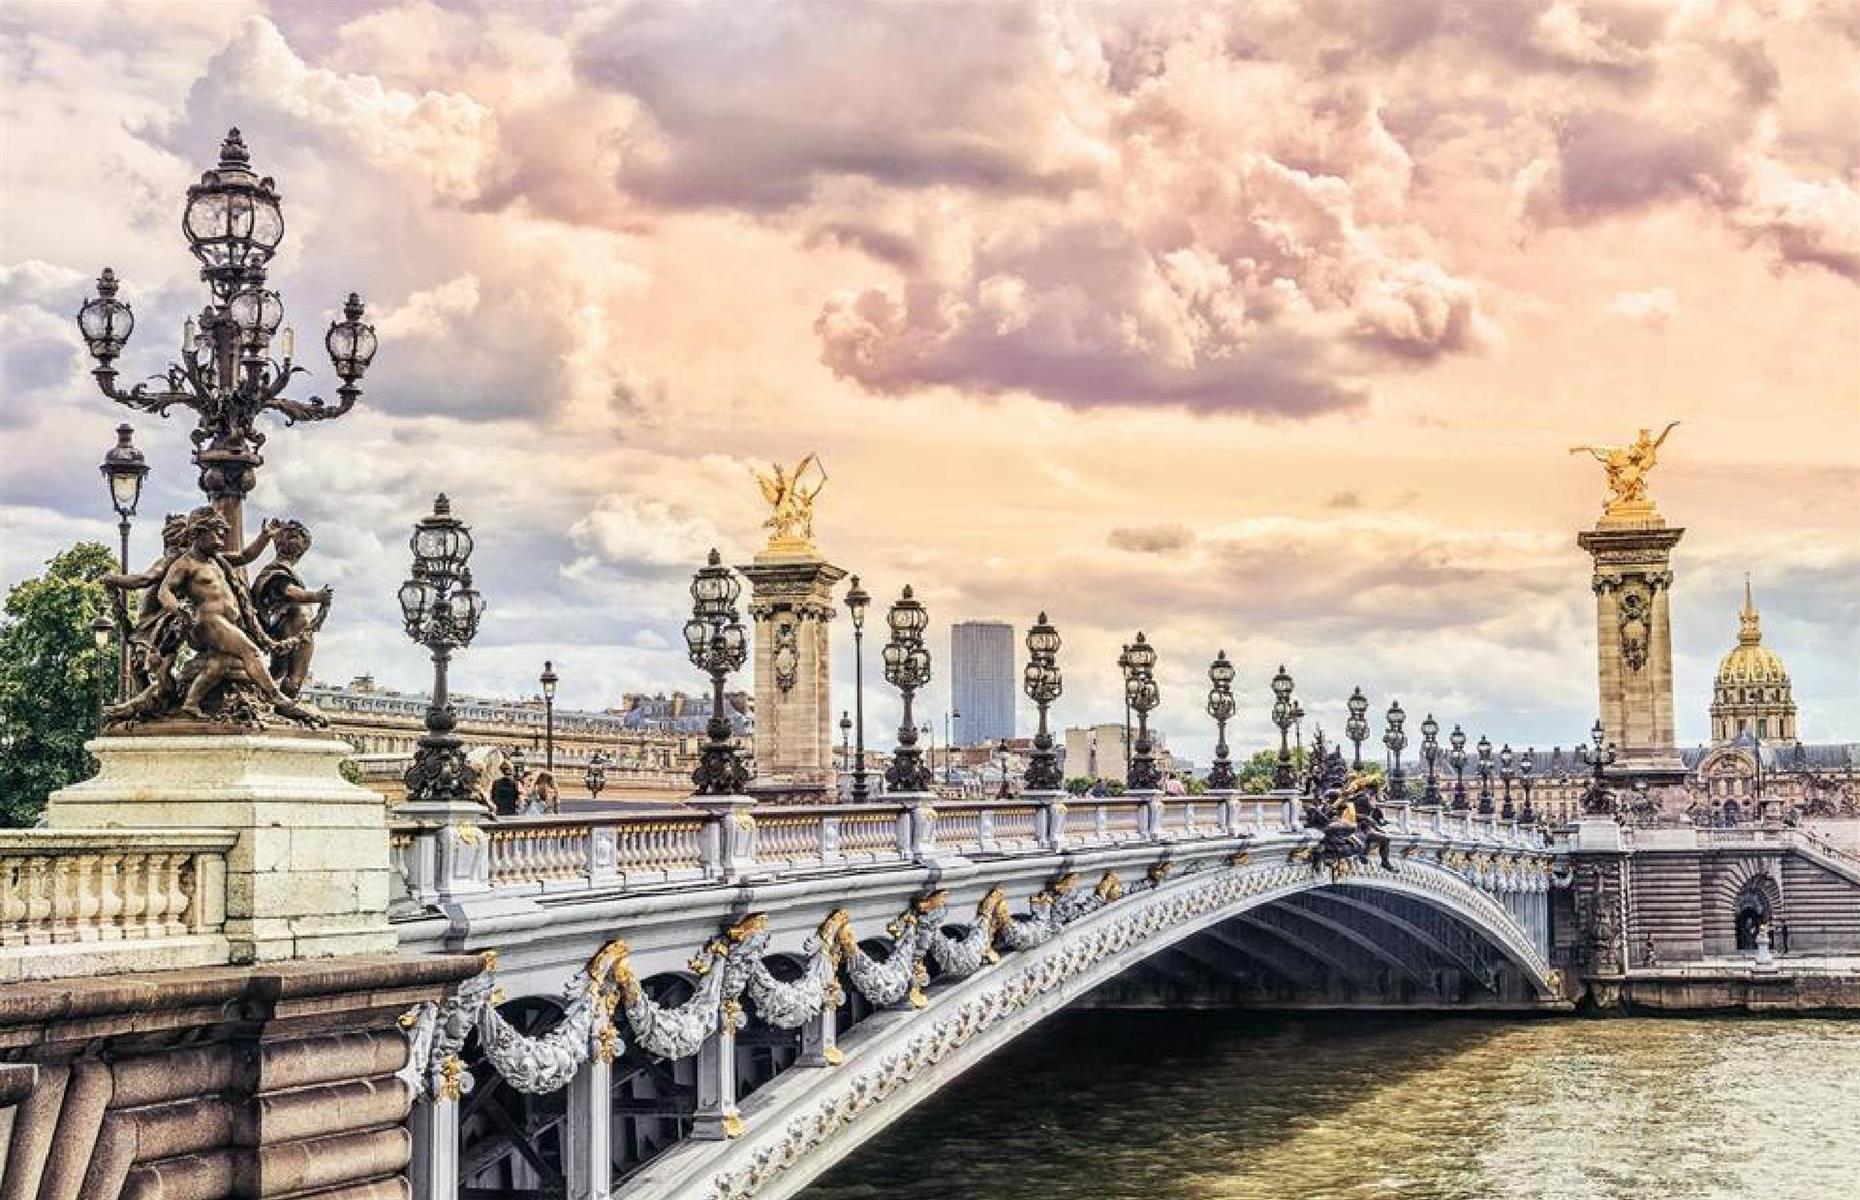 What the world’s most stunning bridges tell you about their history